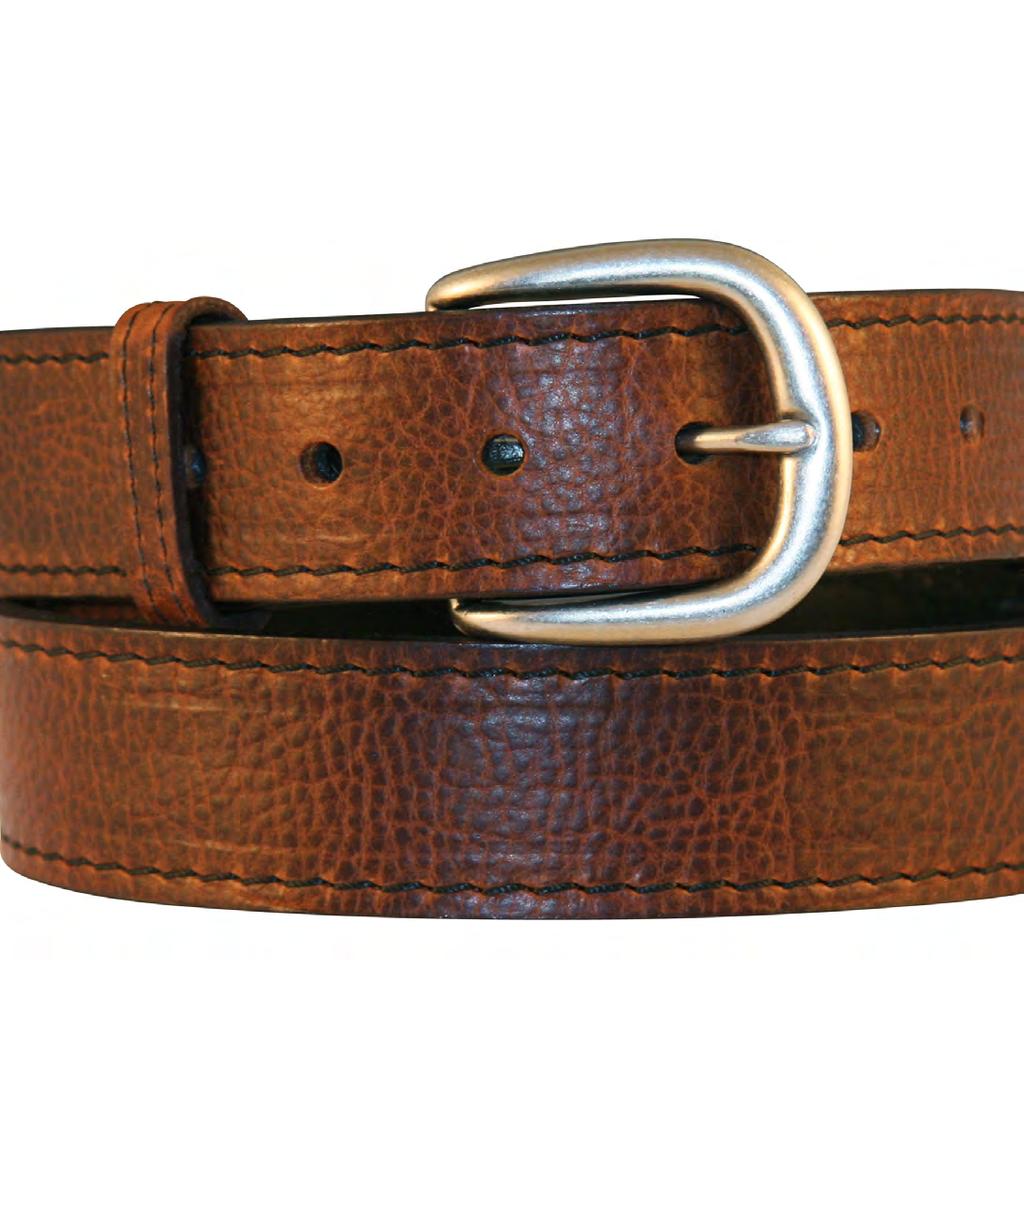 FINE LEATHER BELTS THAT ARE CRAFTED WITH PRIDE IN THE USA Sales to Dealers Only BOSTON LEATHER, INC.